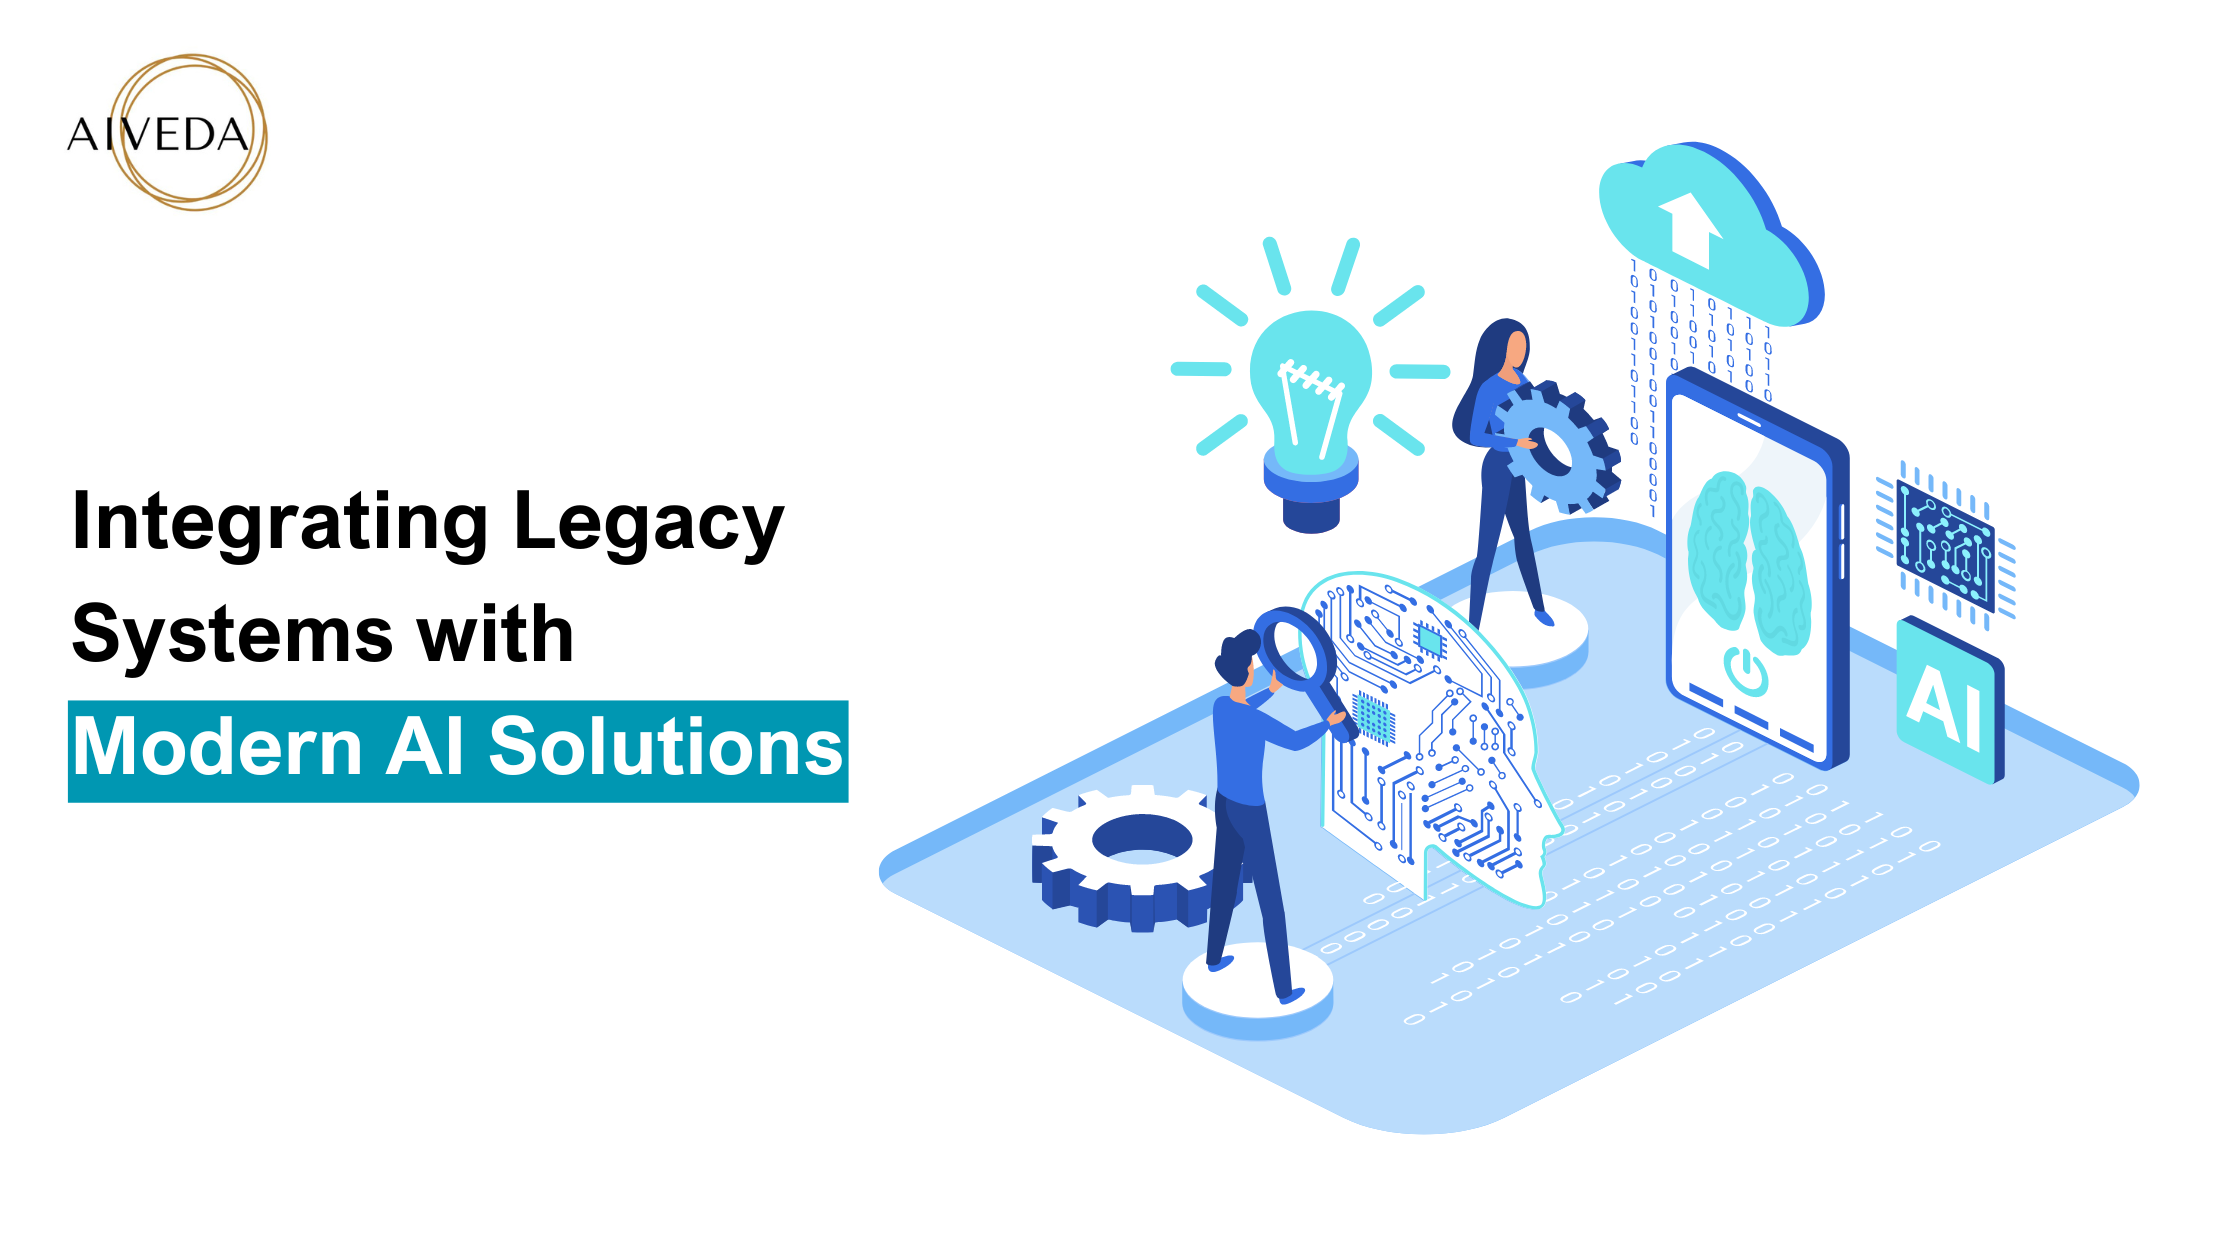 Integrating Legacy Systems with Modern AI Solutions